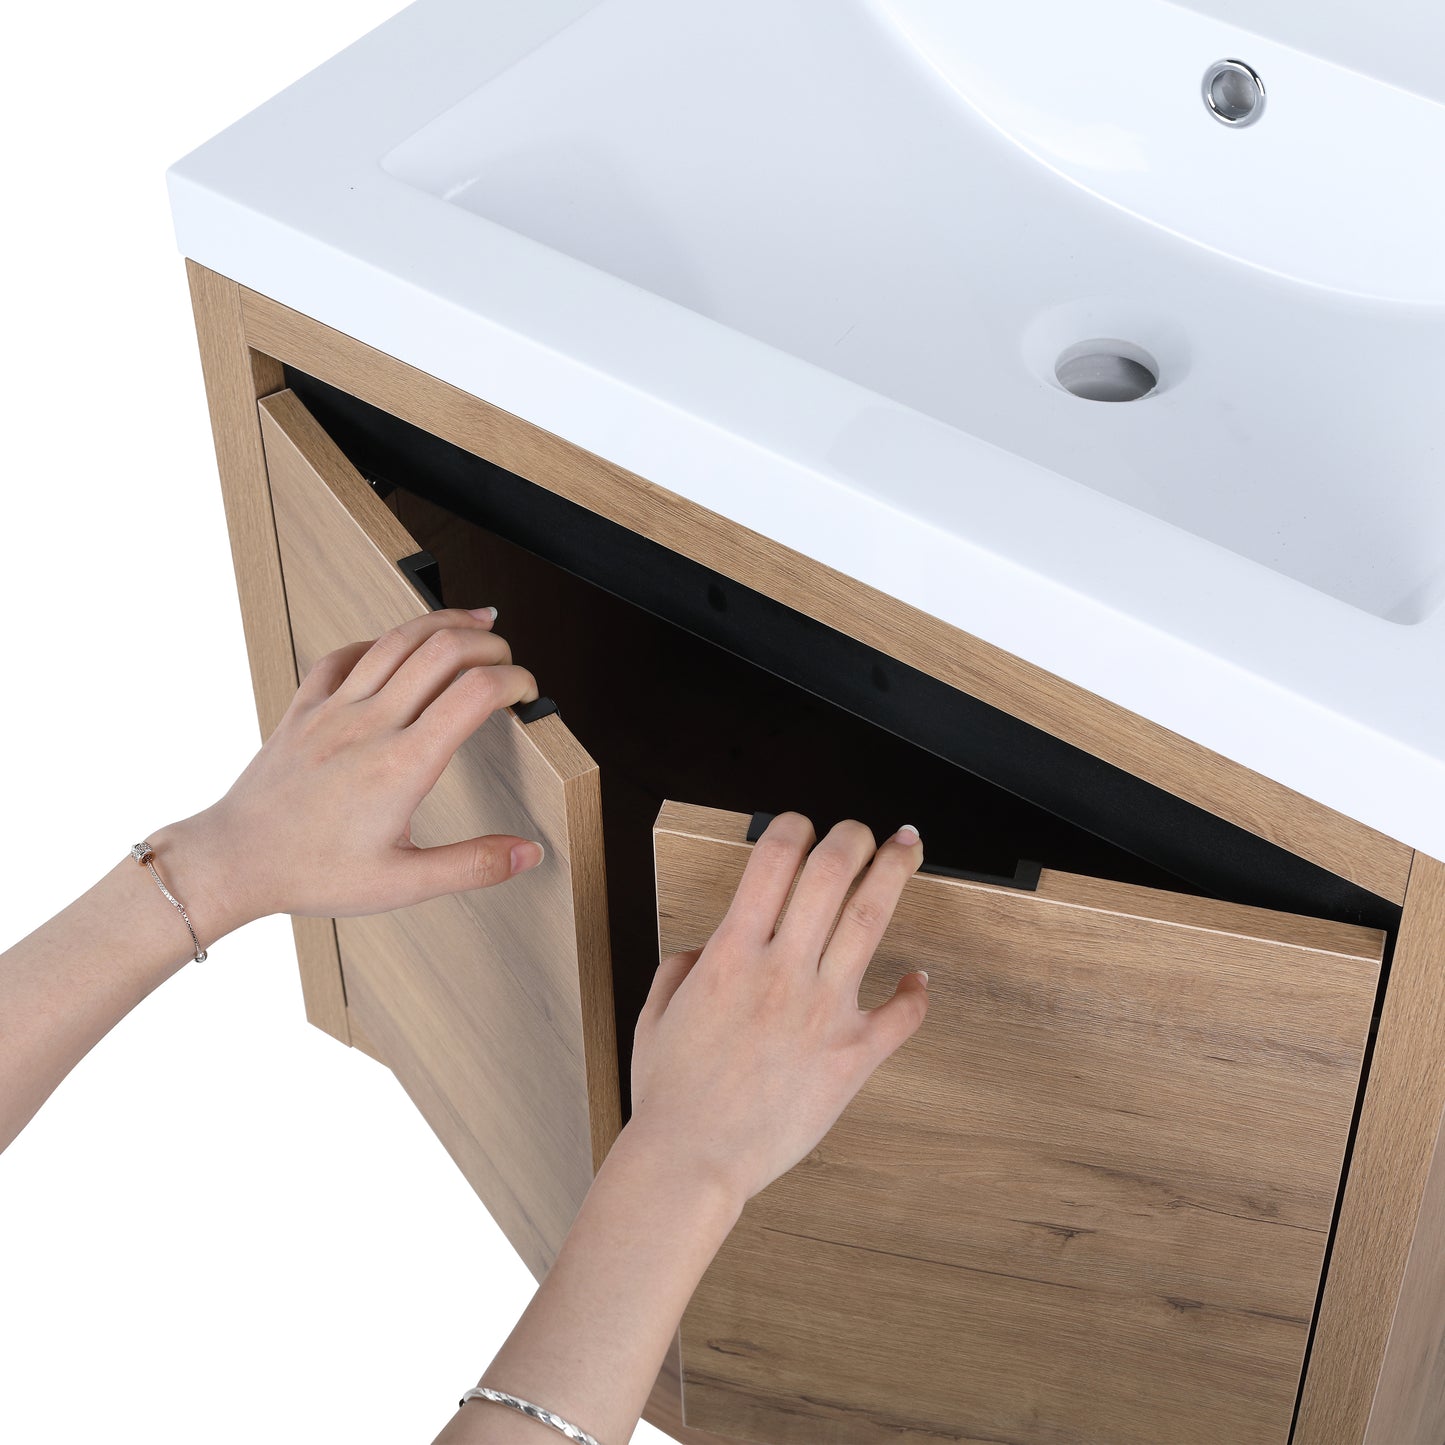 Bathroom Cabinet With Sink,Soft Close Doors,Float Mounting Design,24 Inch For Small Bathroom,24x18-00924 IMO-1（KD-Packing）